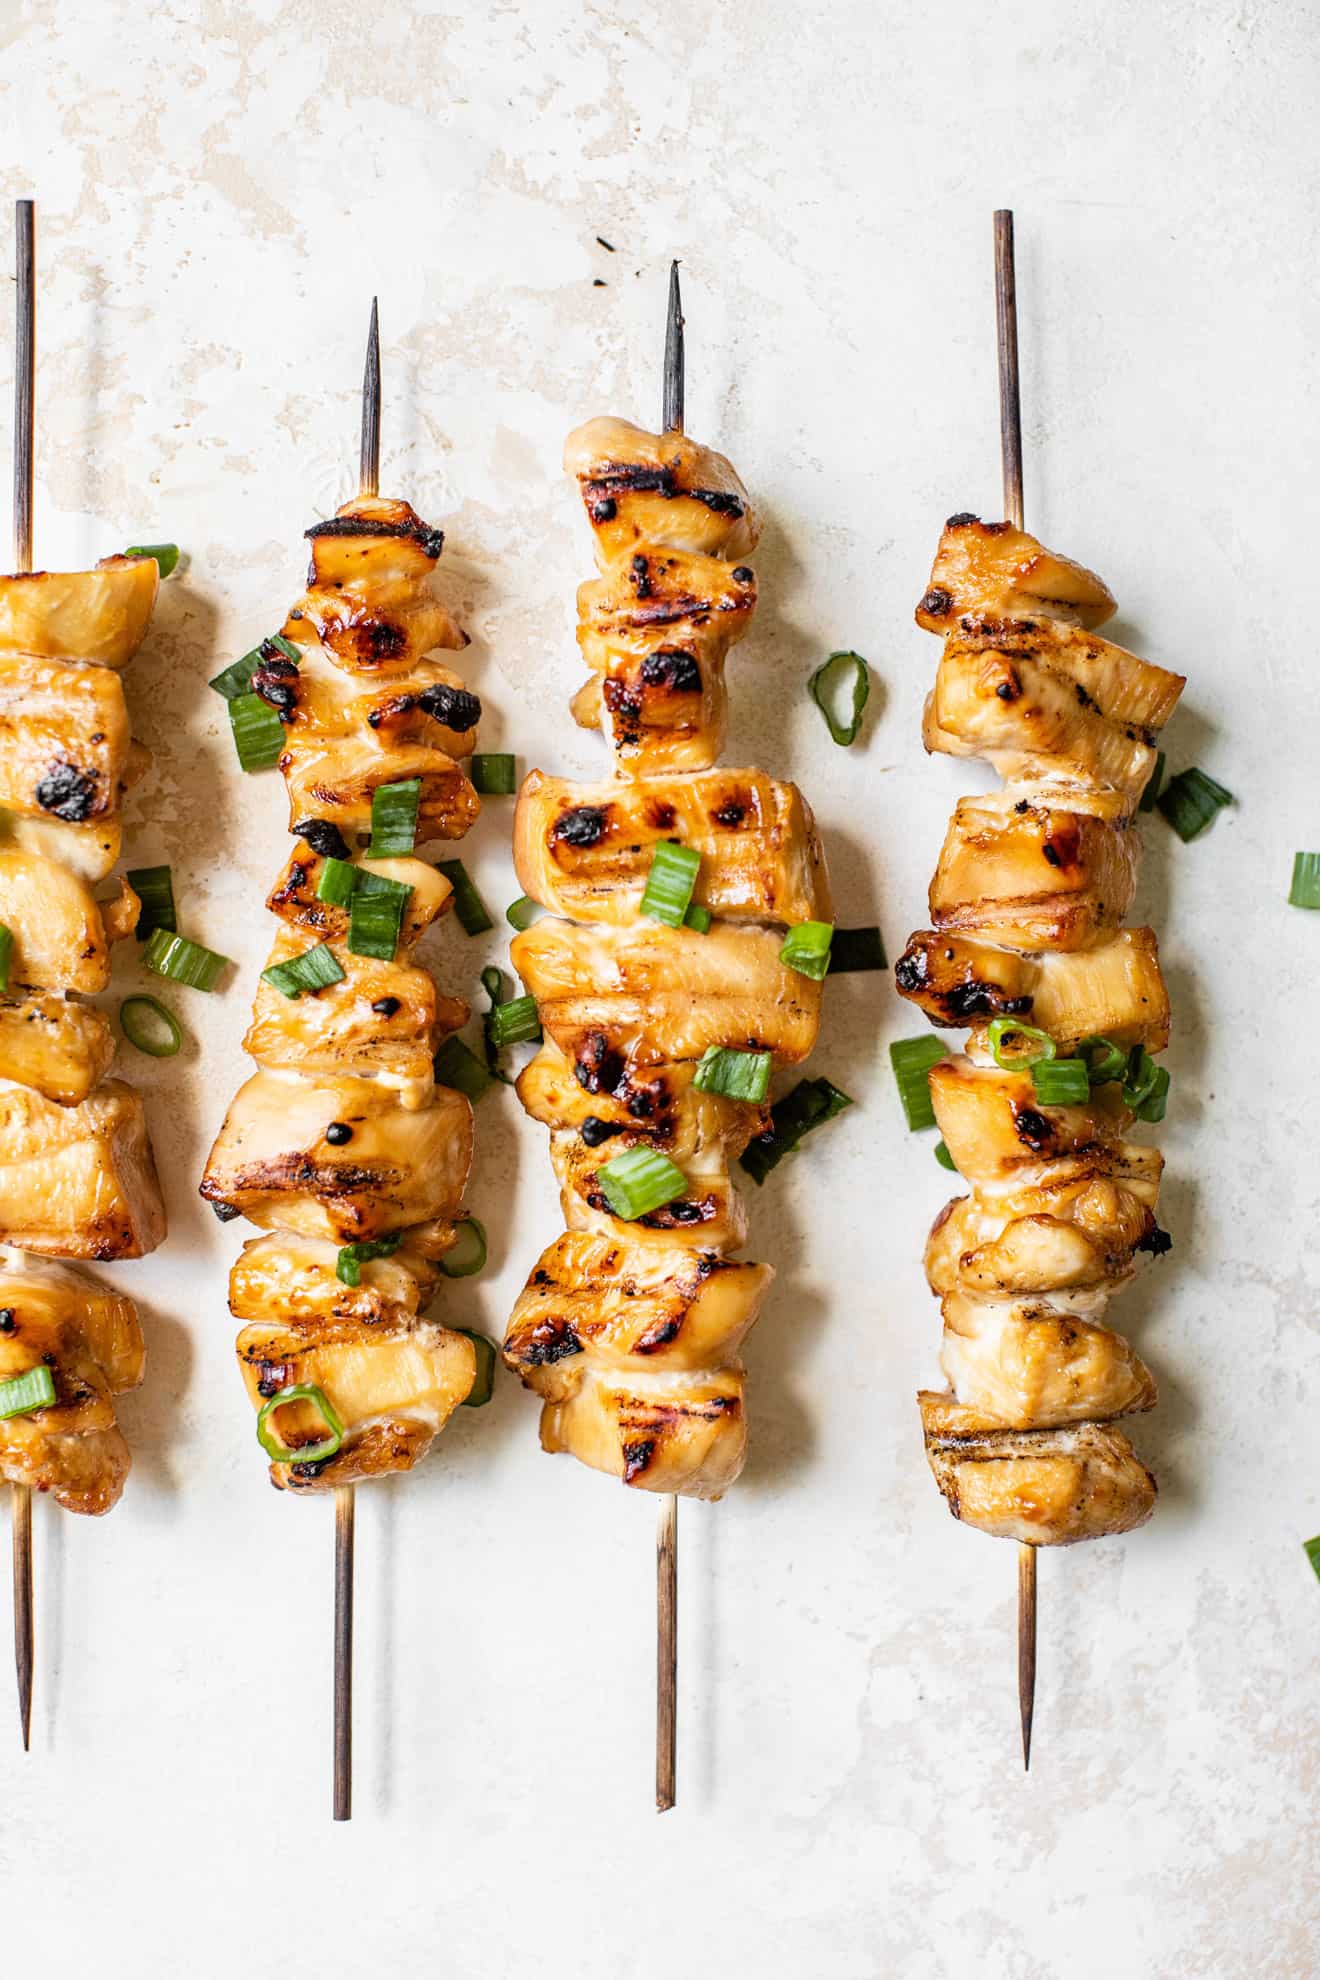 Soy Marinated Grilled Chicken